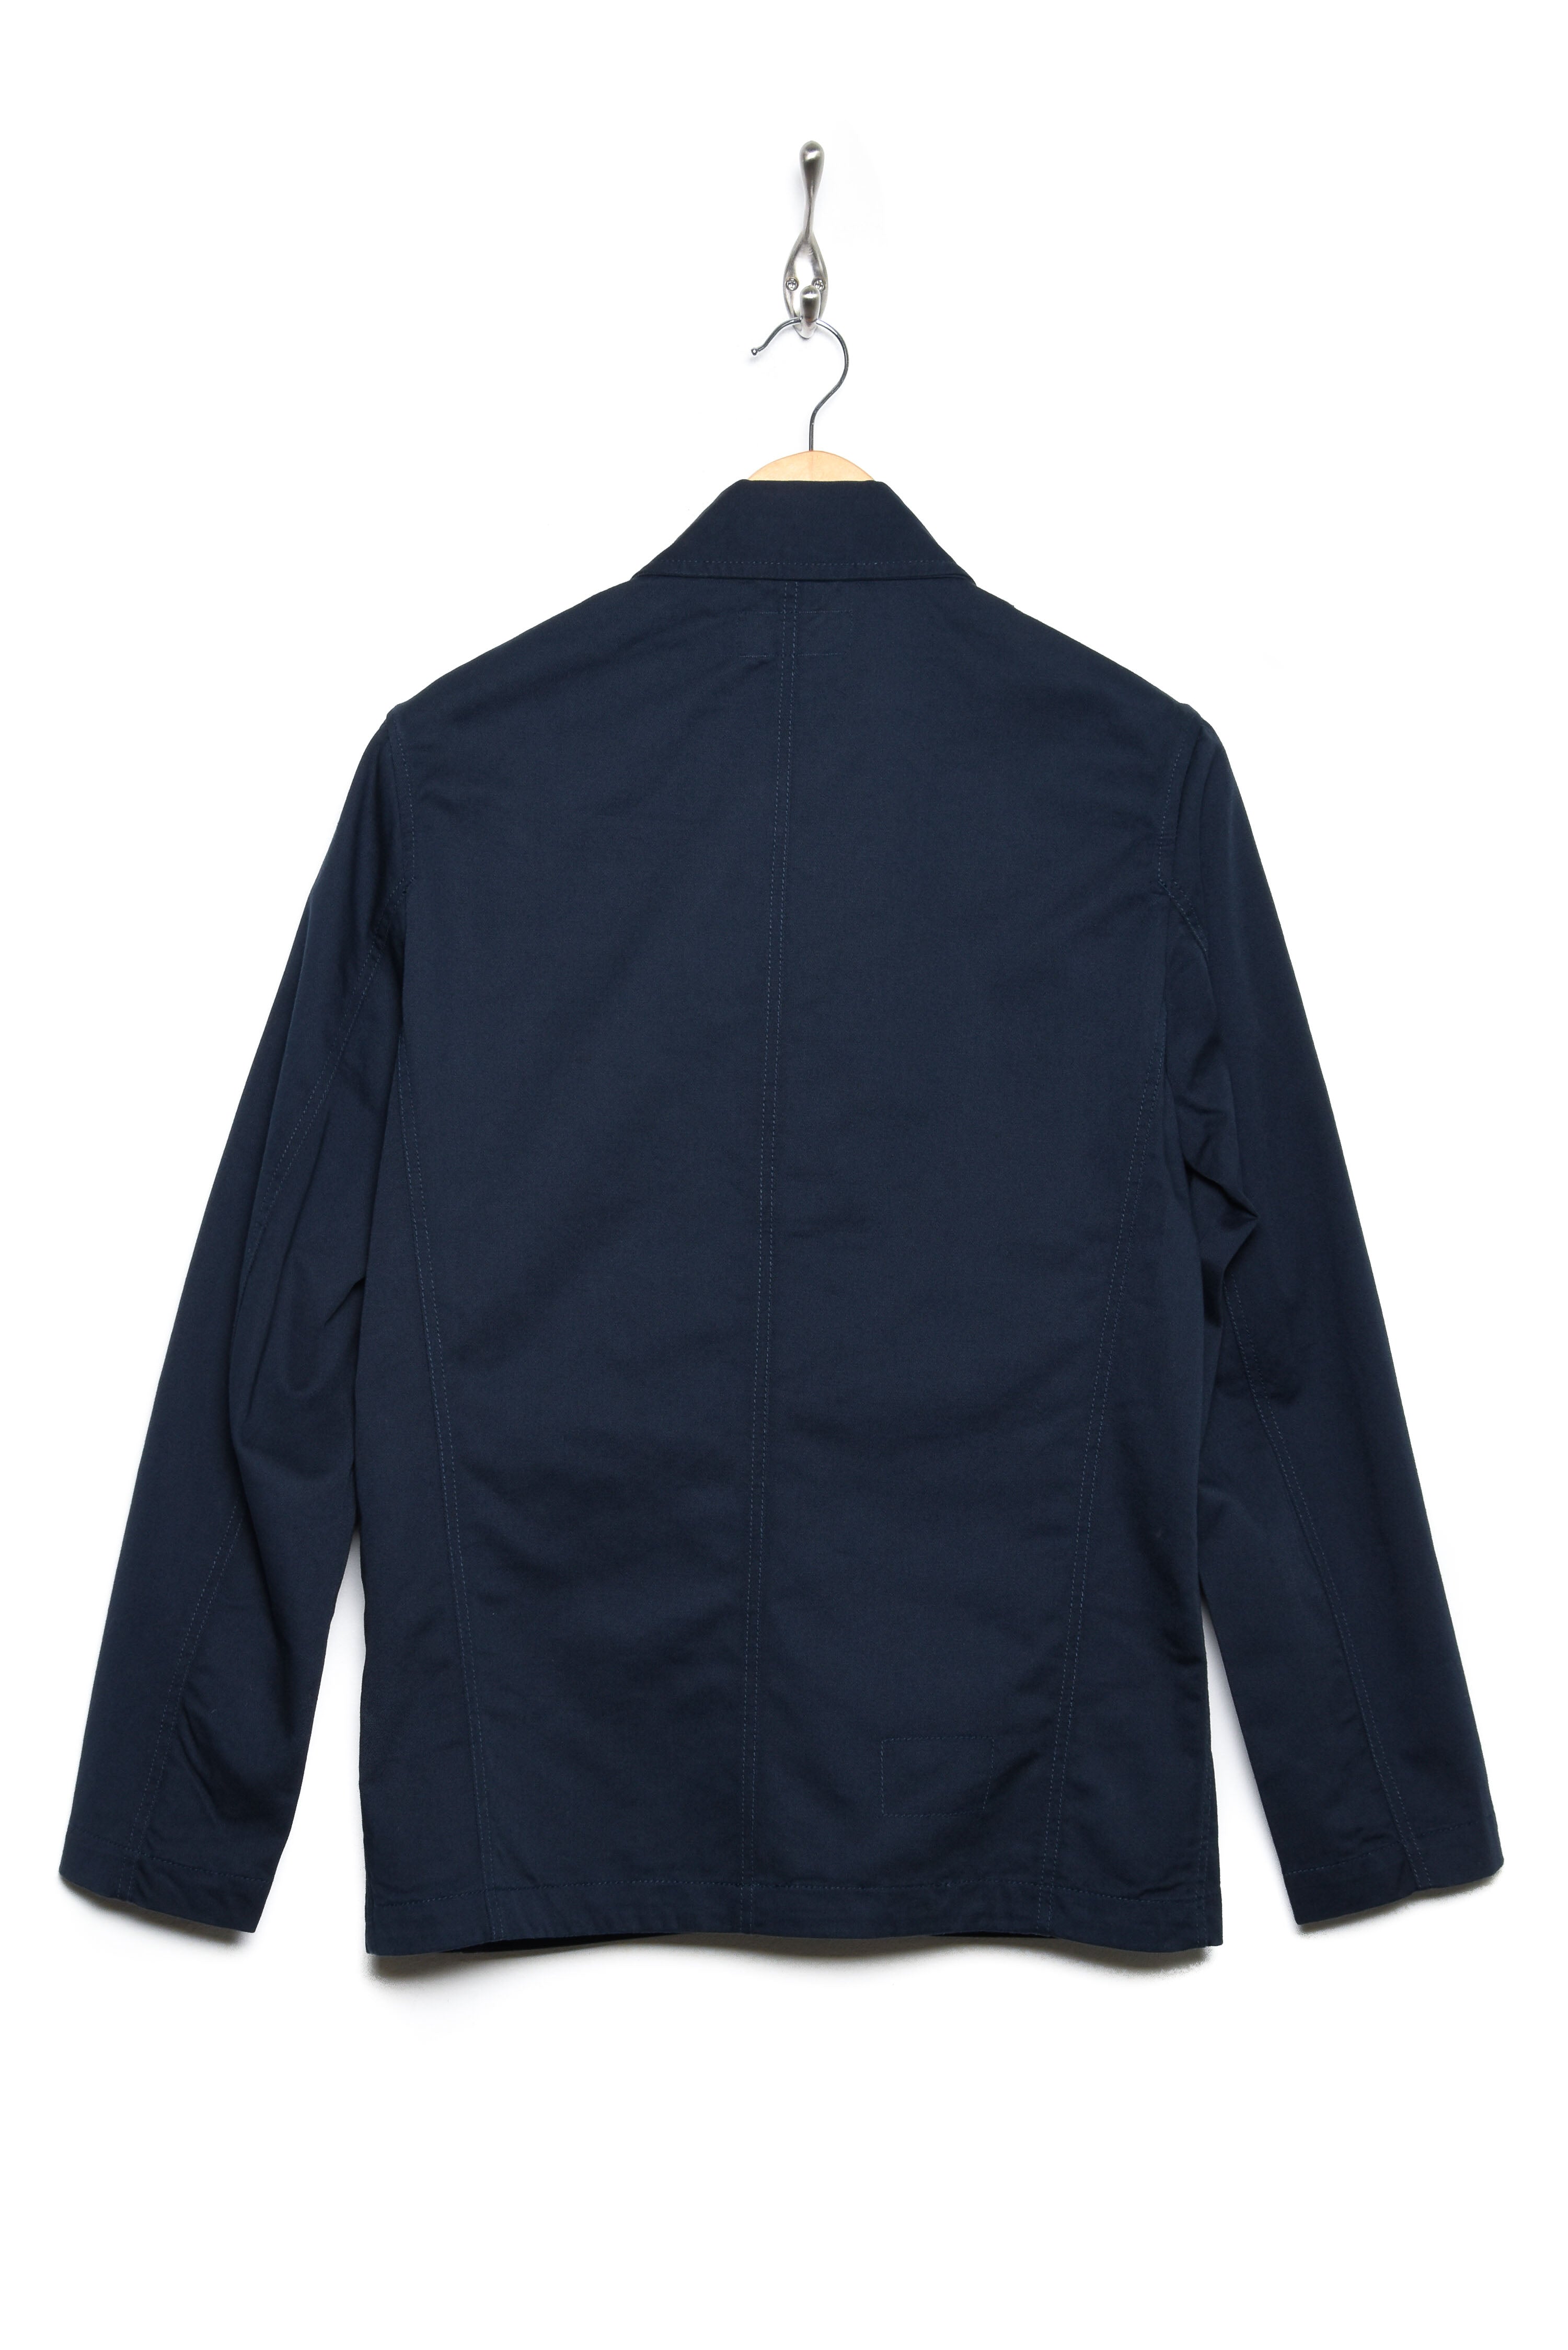 Universal Works Bakers Jacket twill navy 00102